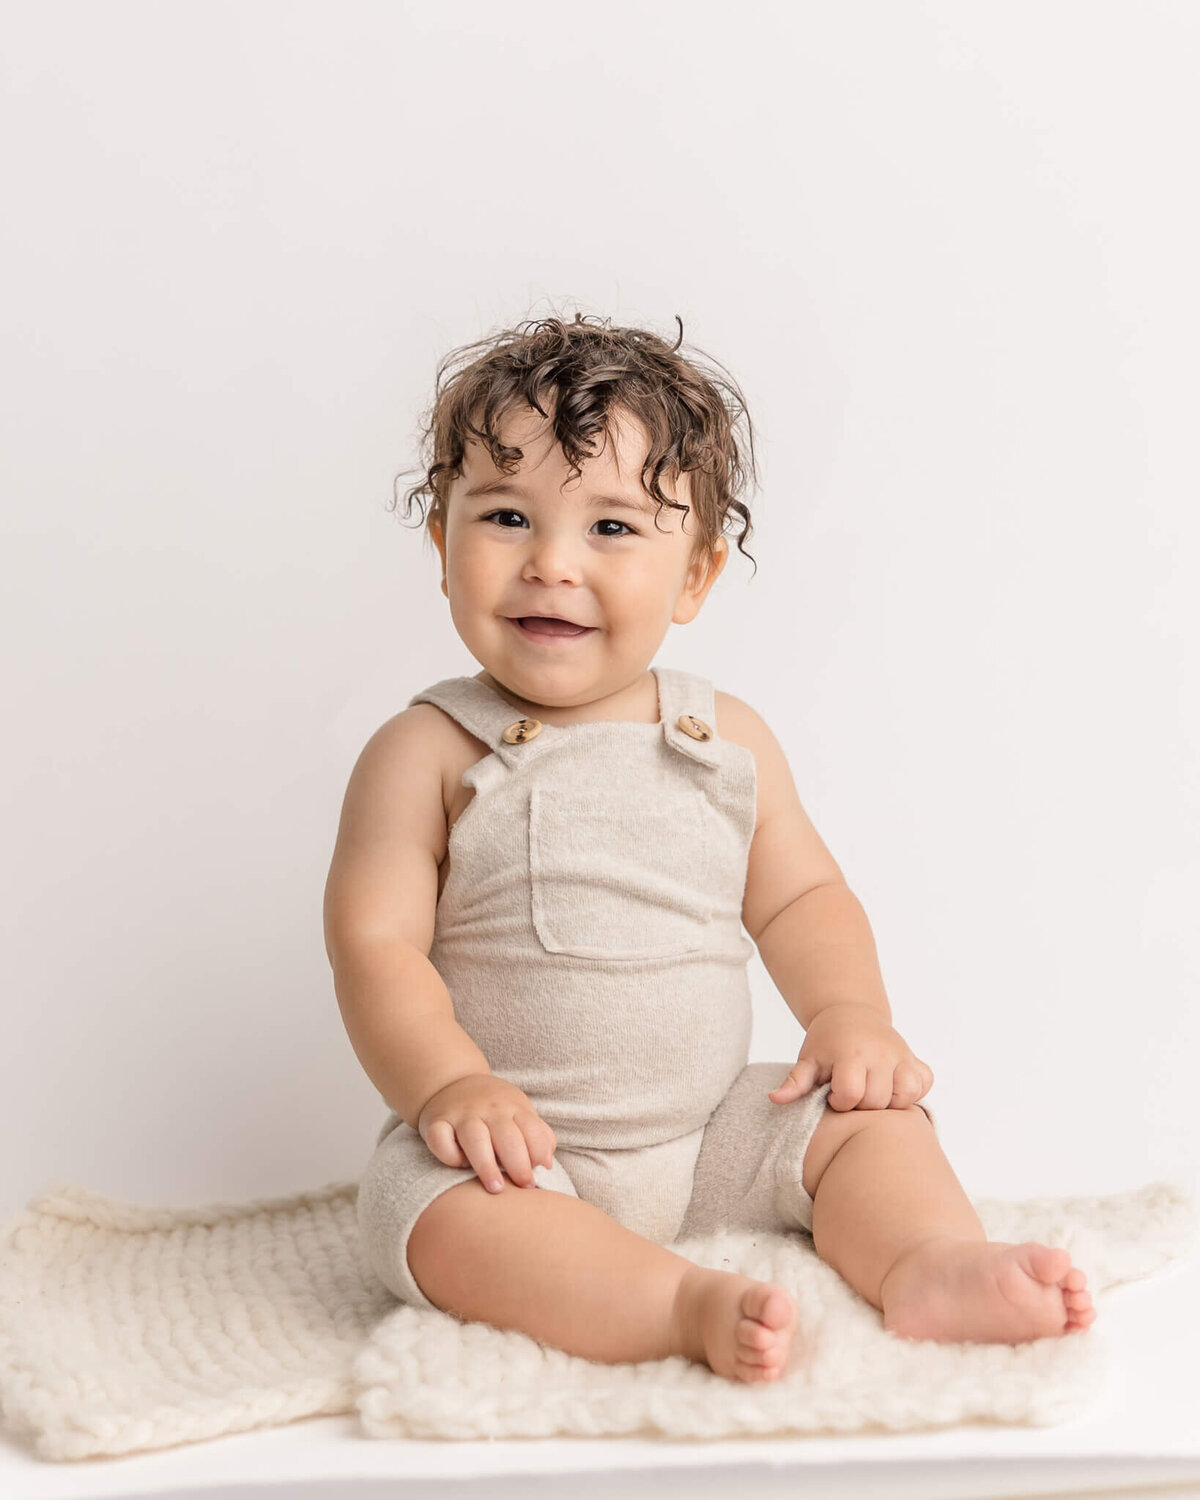 baby boy with brown curly hair giving the biggest smiles in all white photo session for his first birthday. Taken by portland milestone photographer Ann Marshall